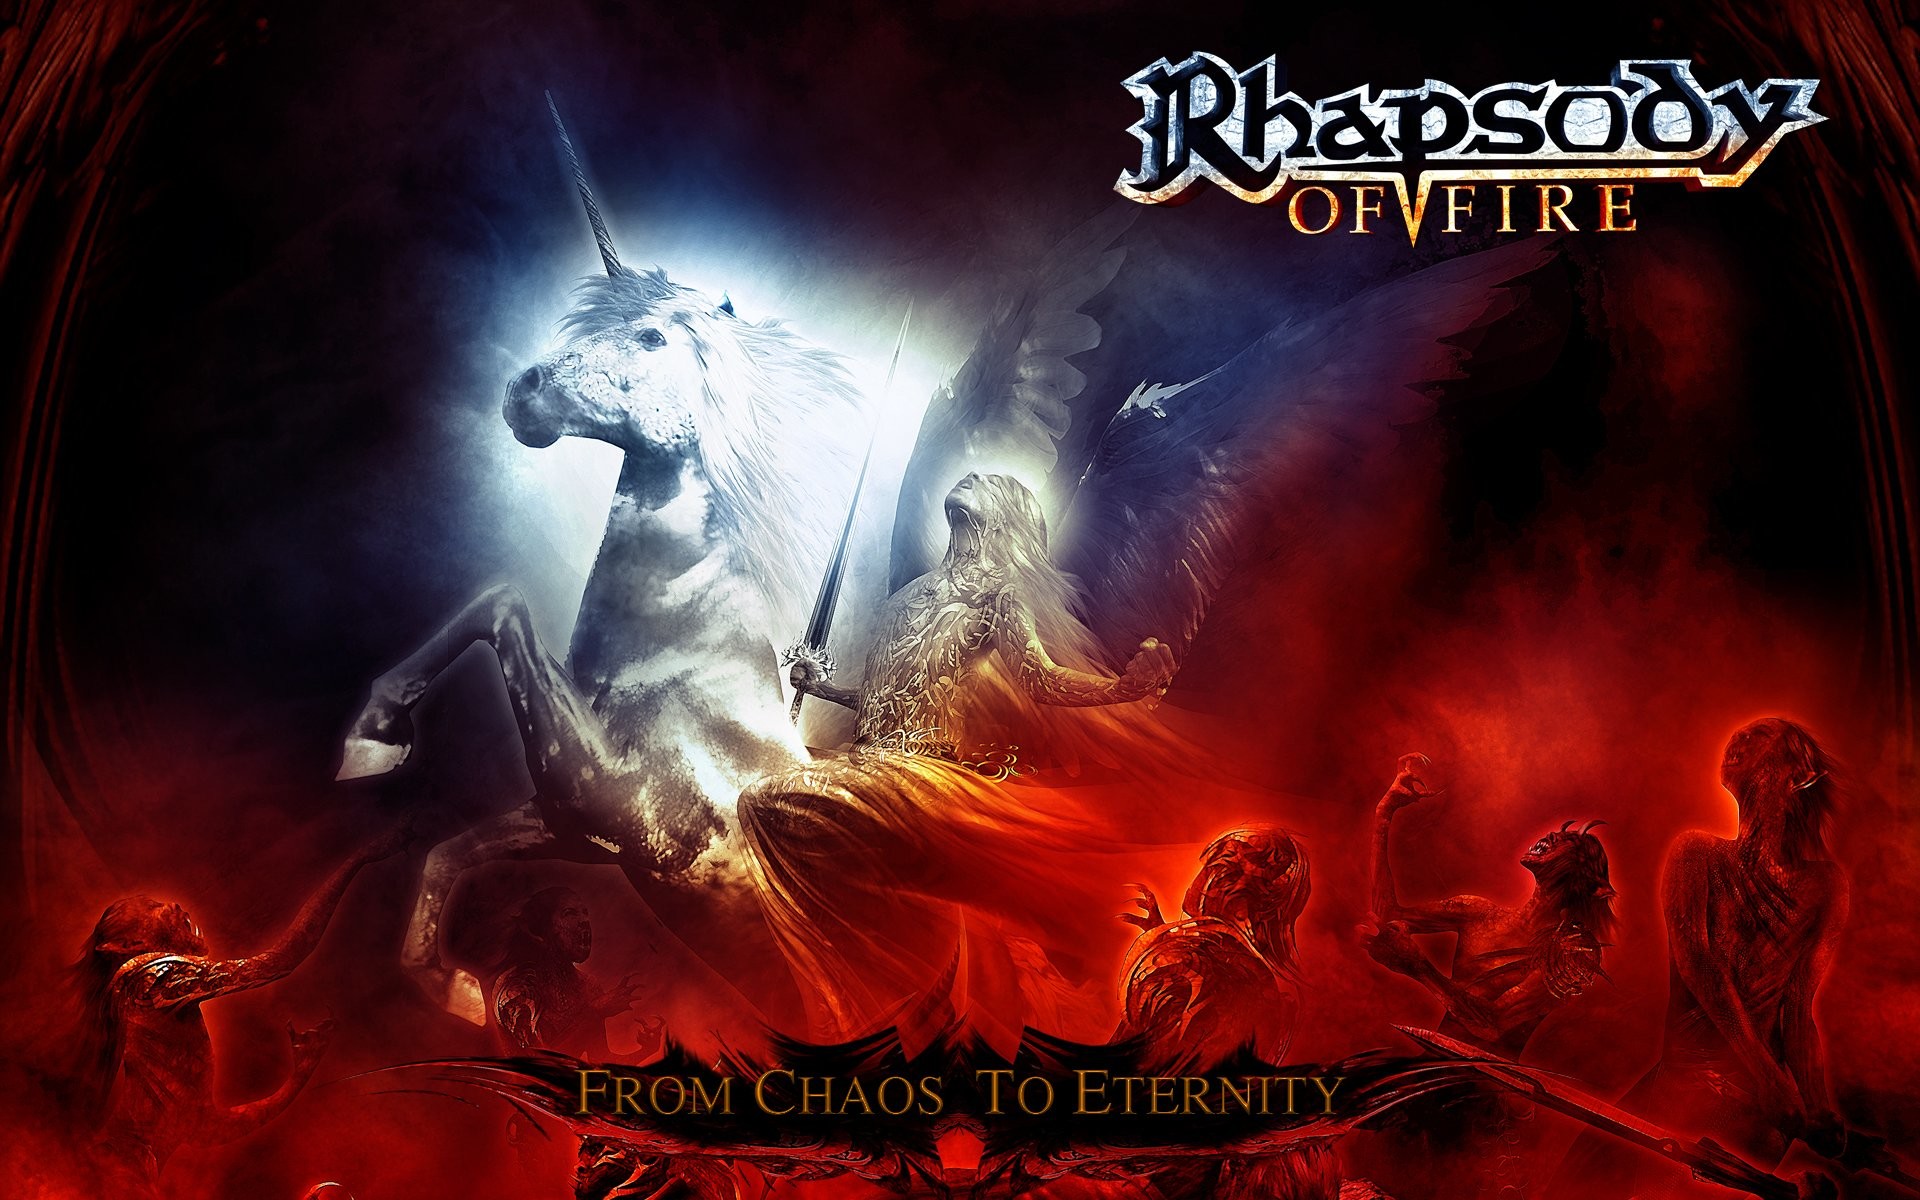 1920x1200 Rhapsody of fire From Chaos to Eternity - Fantasy - wallpapers